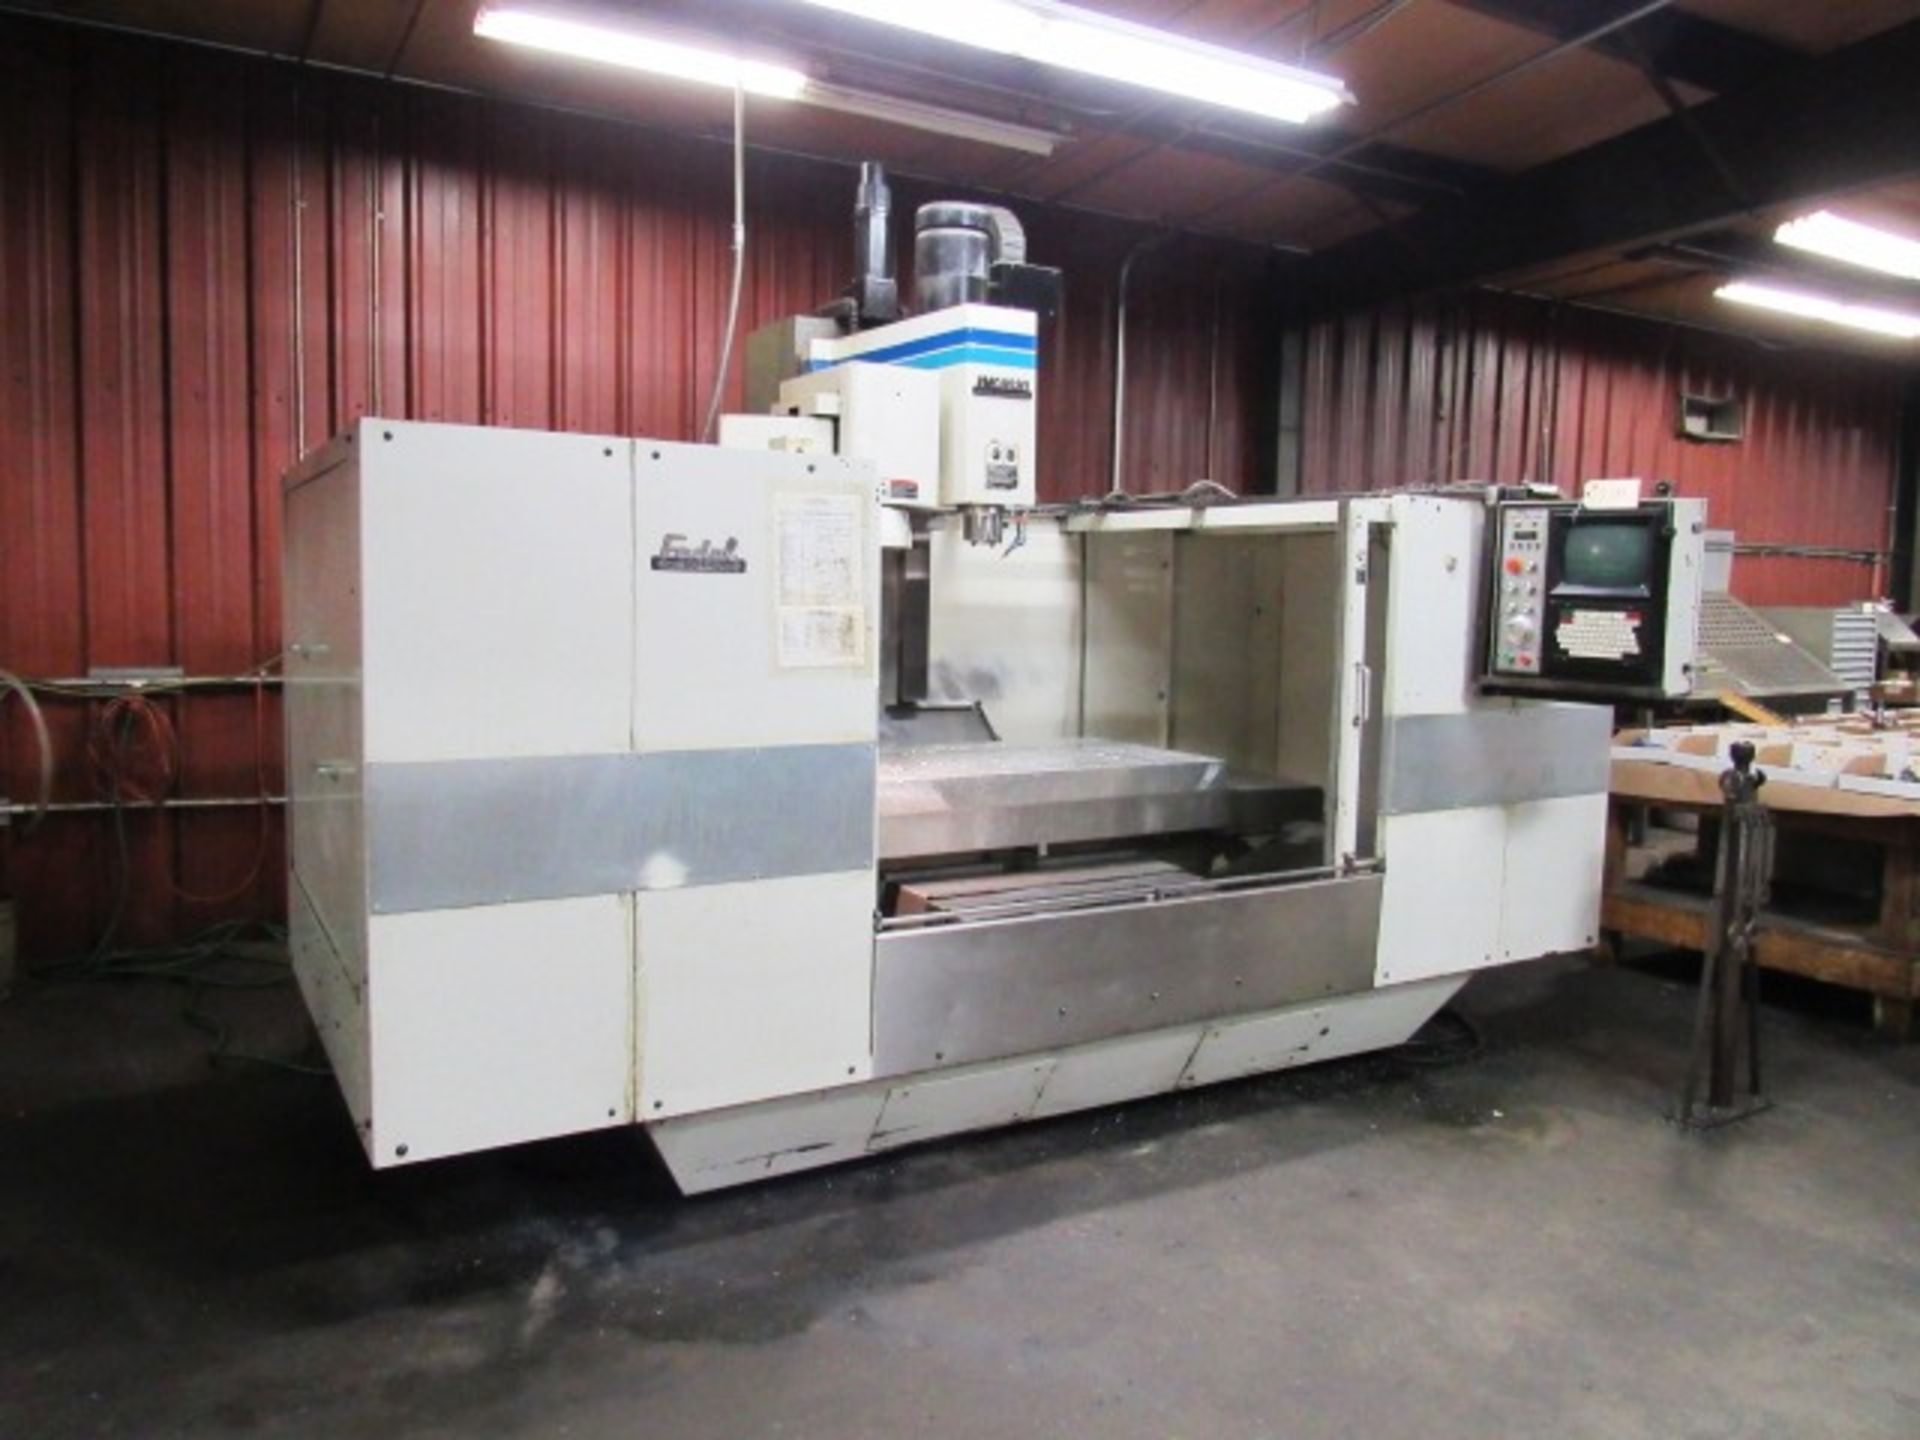 Fadal 6030HT CNC Vertical Machining Center with 62.5'' x 30'' Table, #40 Spindle Speeds to 10,000 - Image 4 of 5